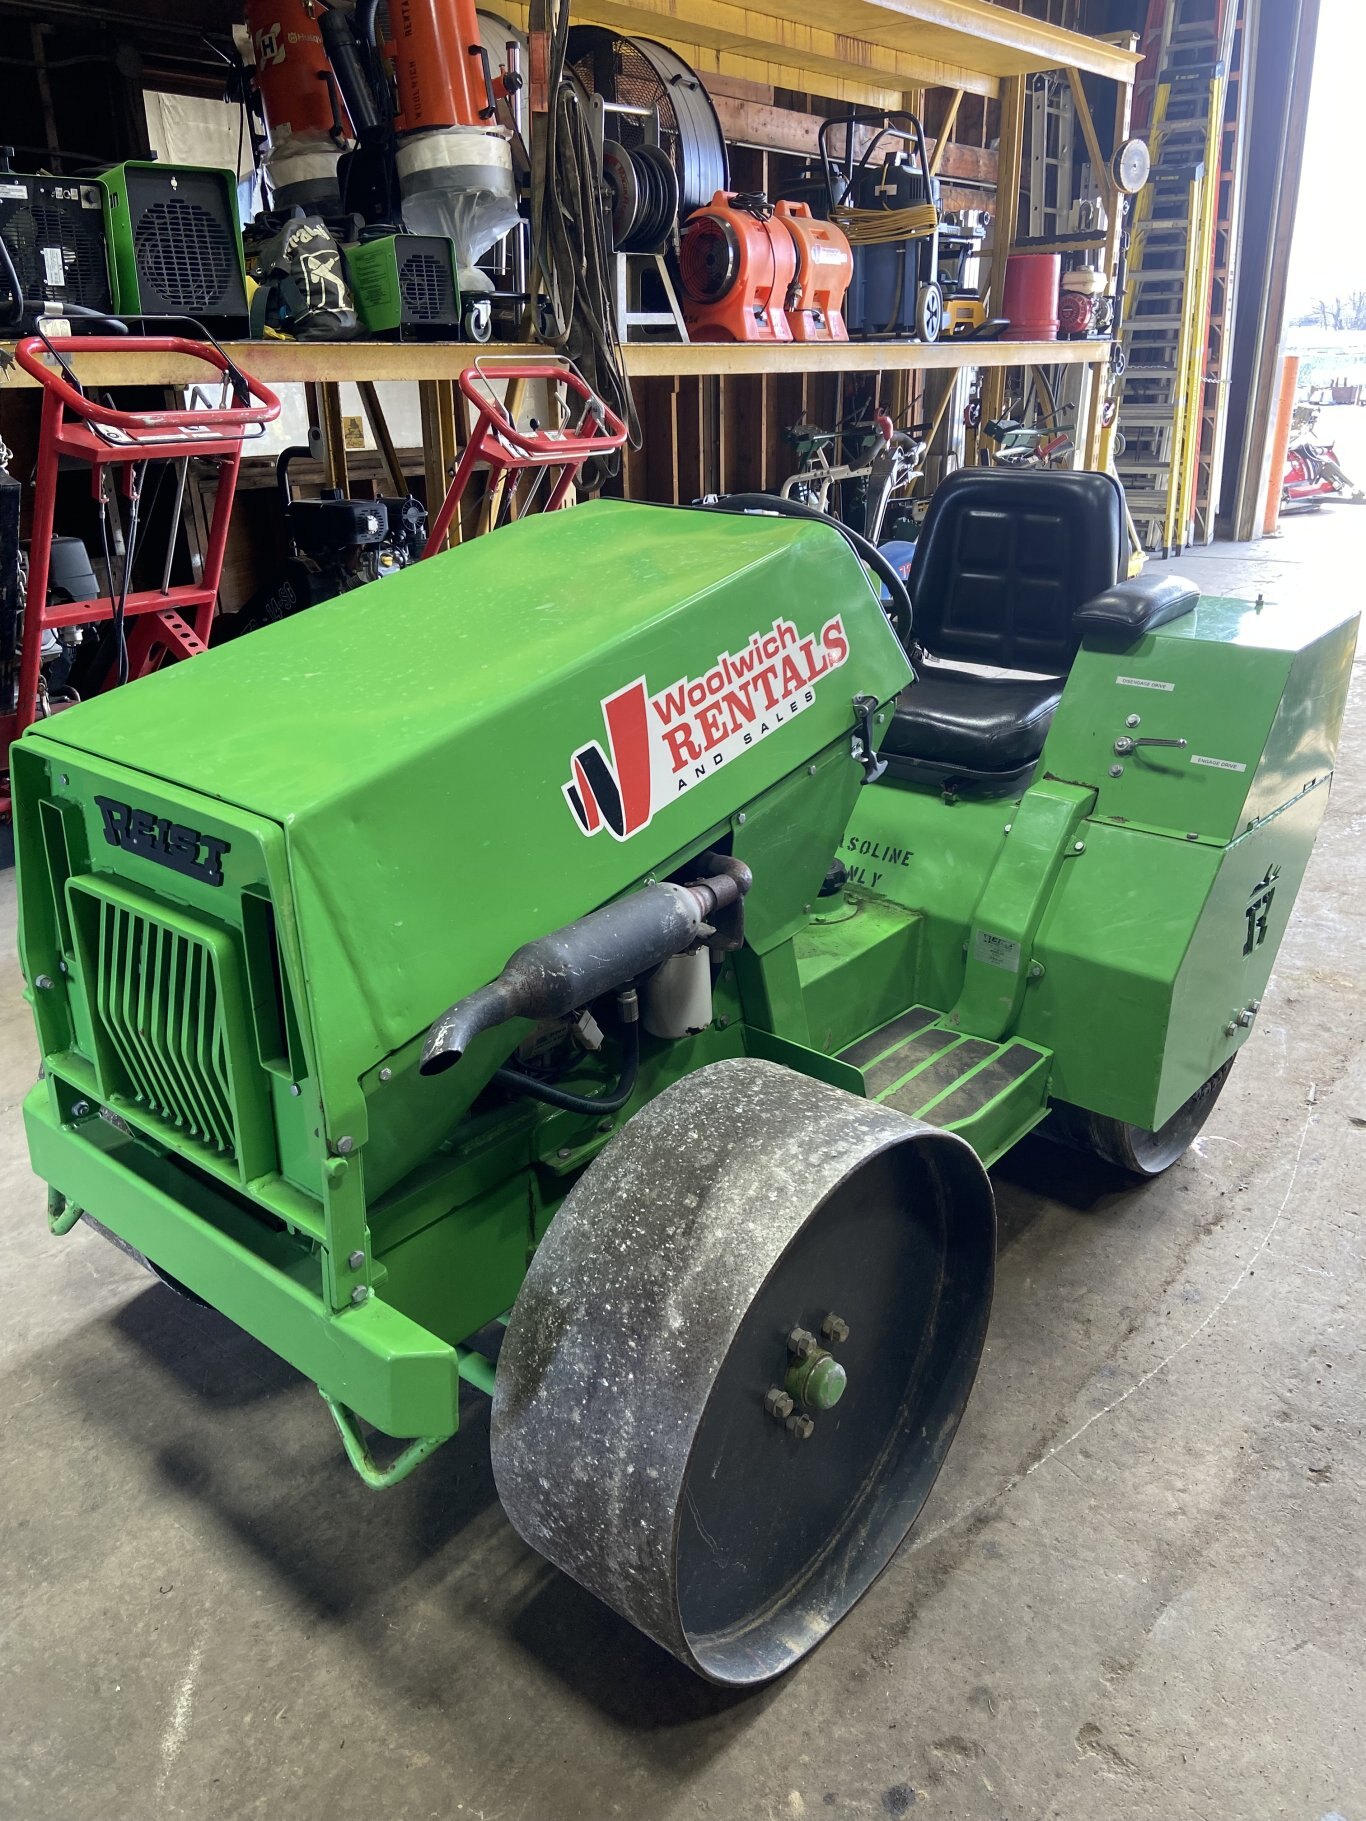 LAWN ROLLER - 42 RIDE ON - 2000LBS DRY/2600LBS WET